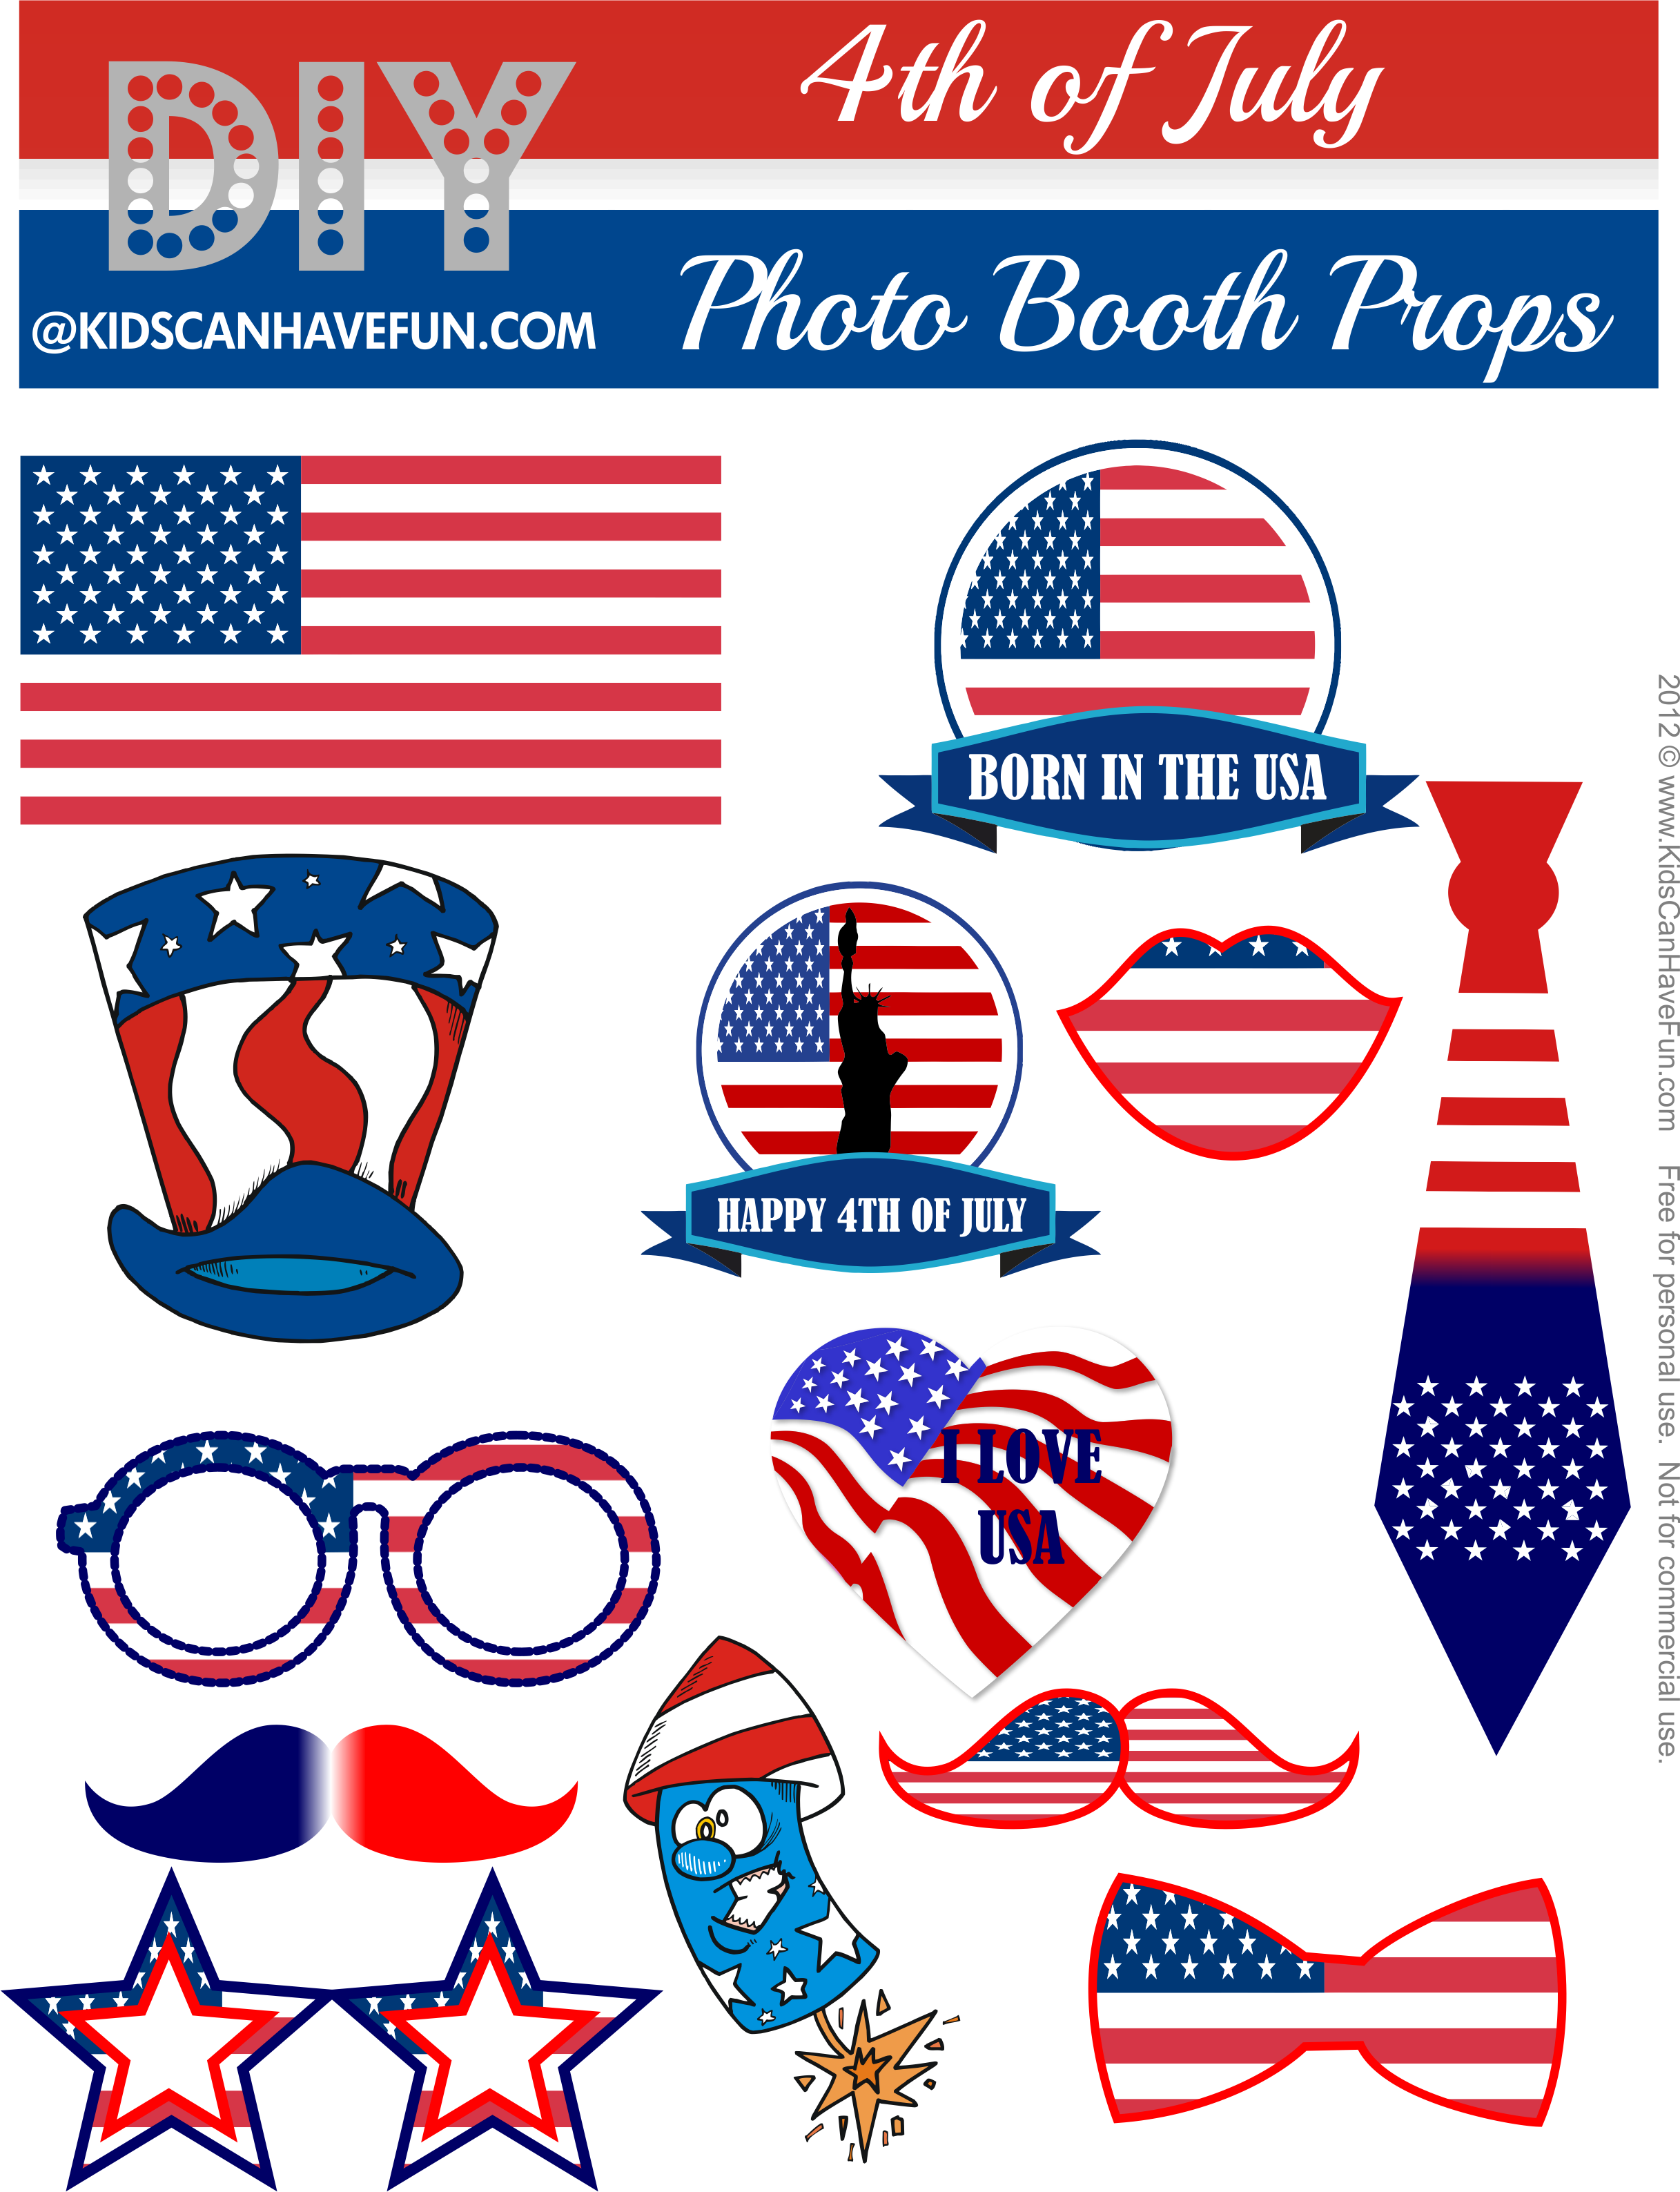 4thof July Photo Booth Props